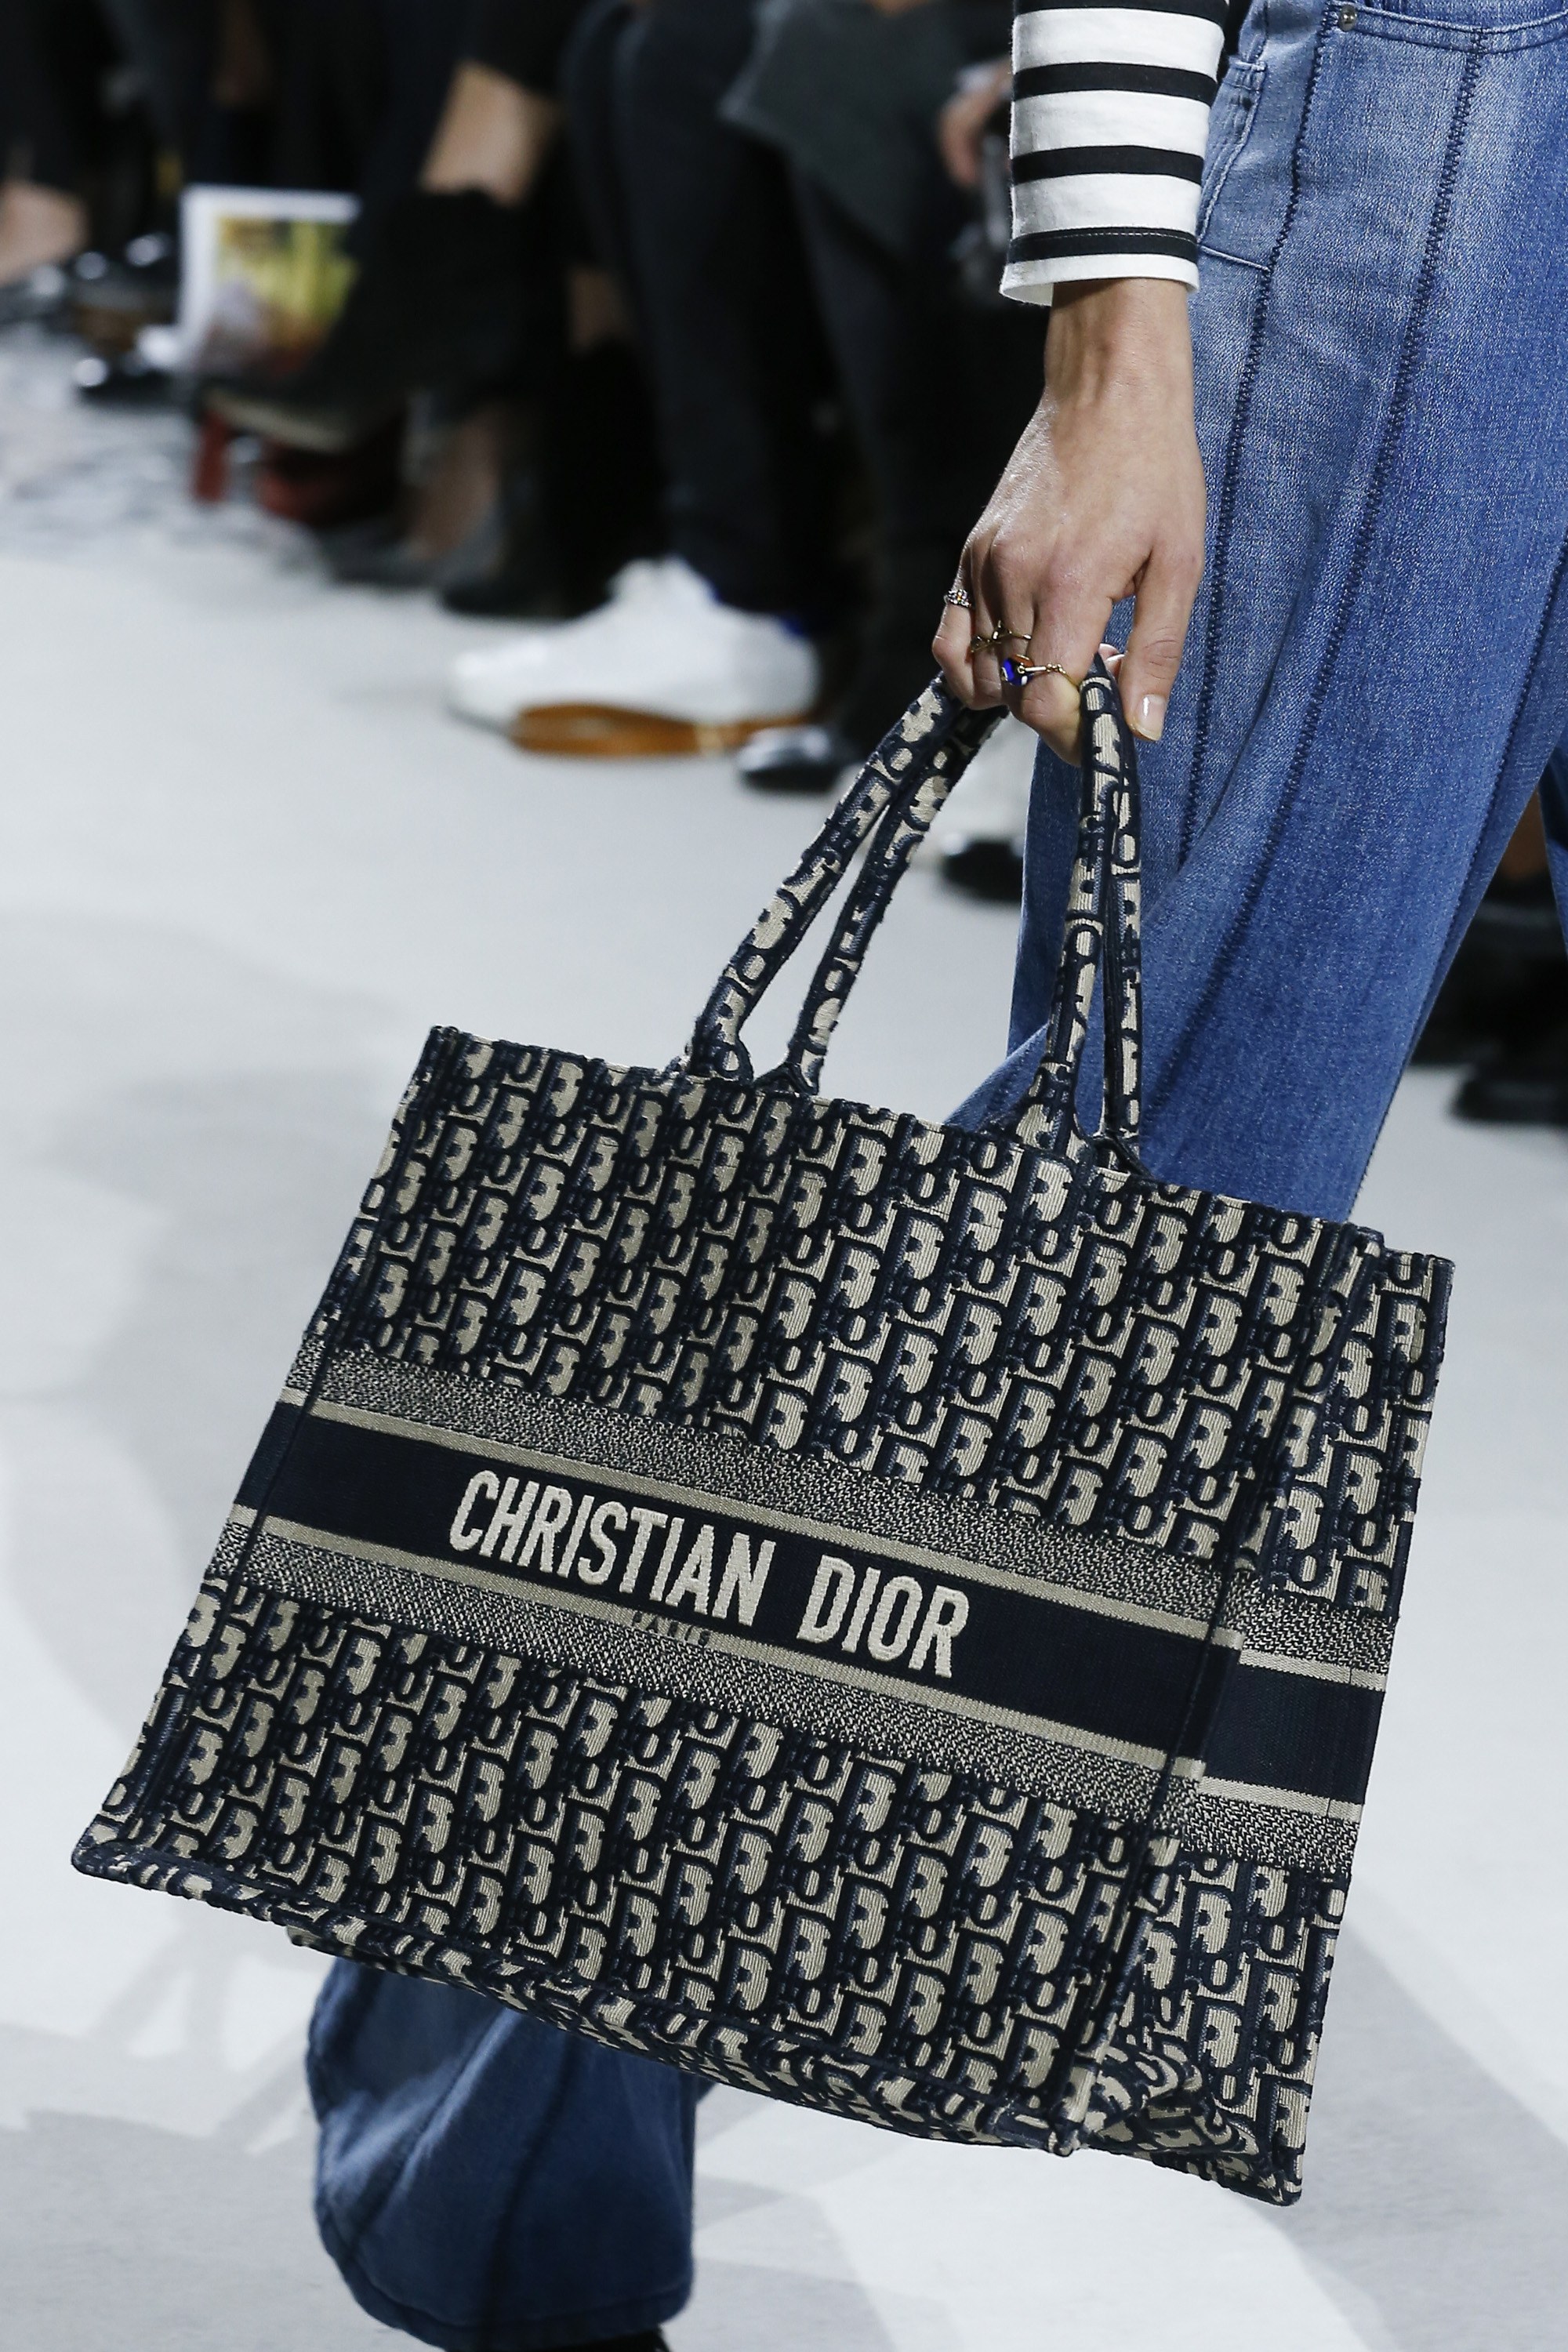 Dior Cruise 2020 Runway Bag Collection - Spotted Fashion